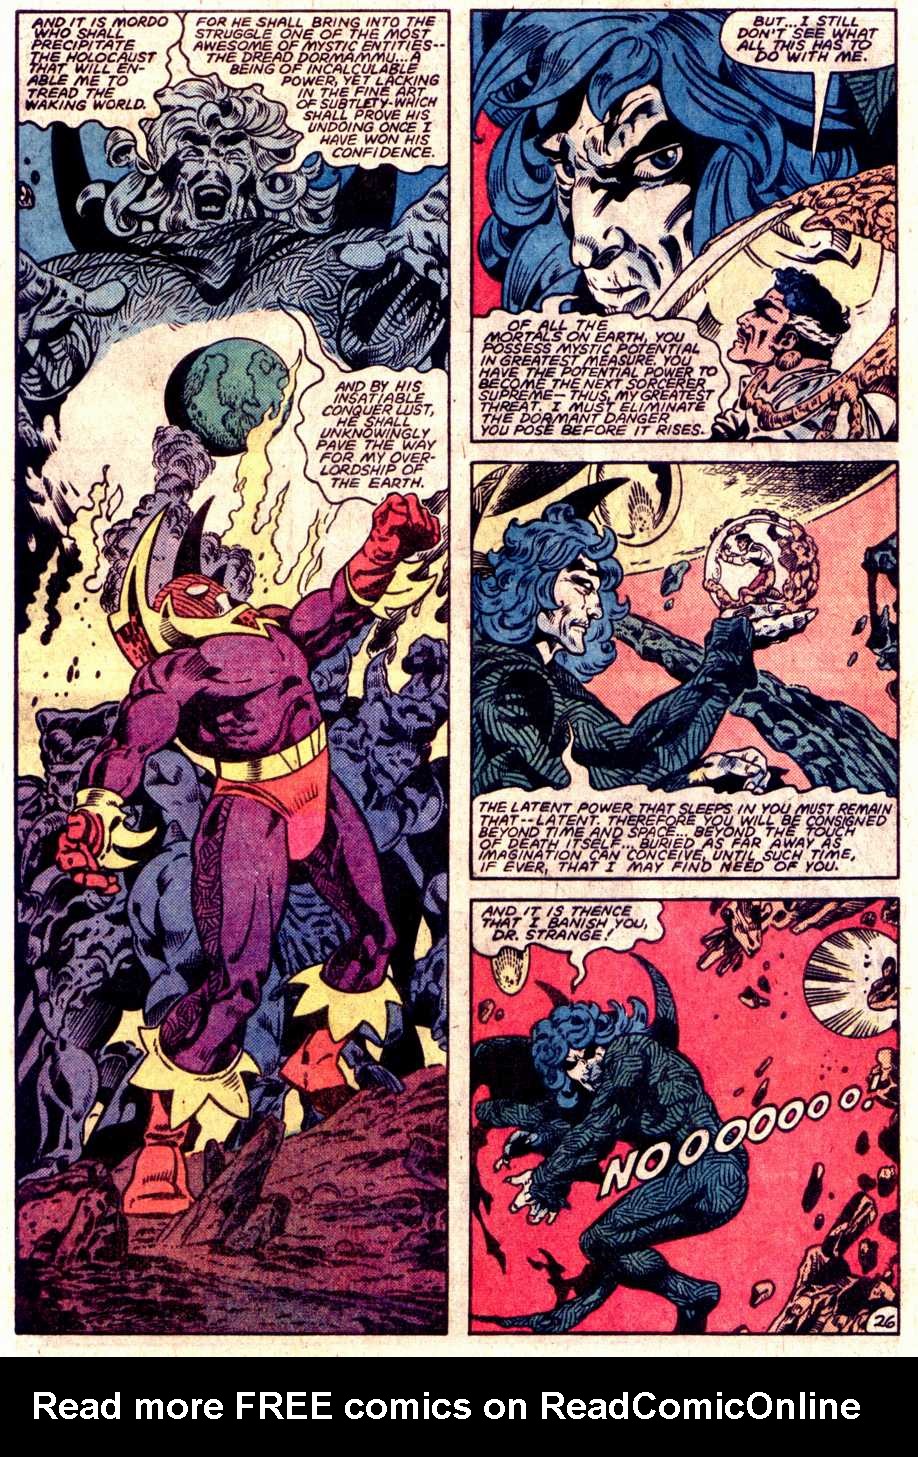 What If? (1977) issue 40 - Dr Strange had not become master of The mystic arts - Page 27